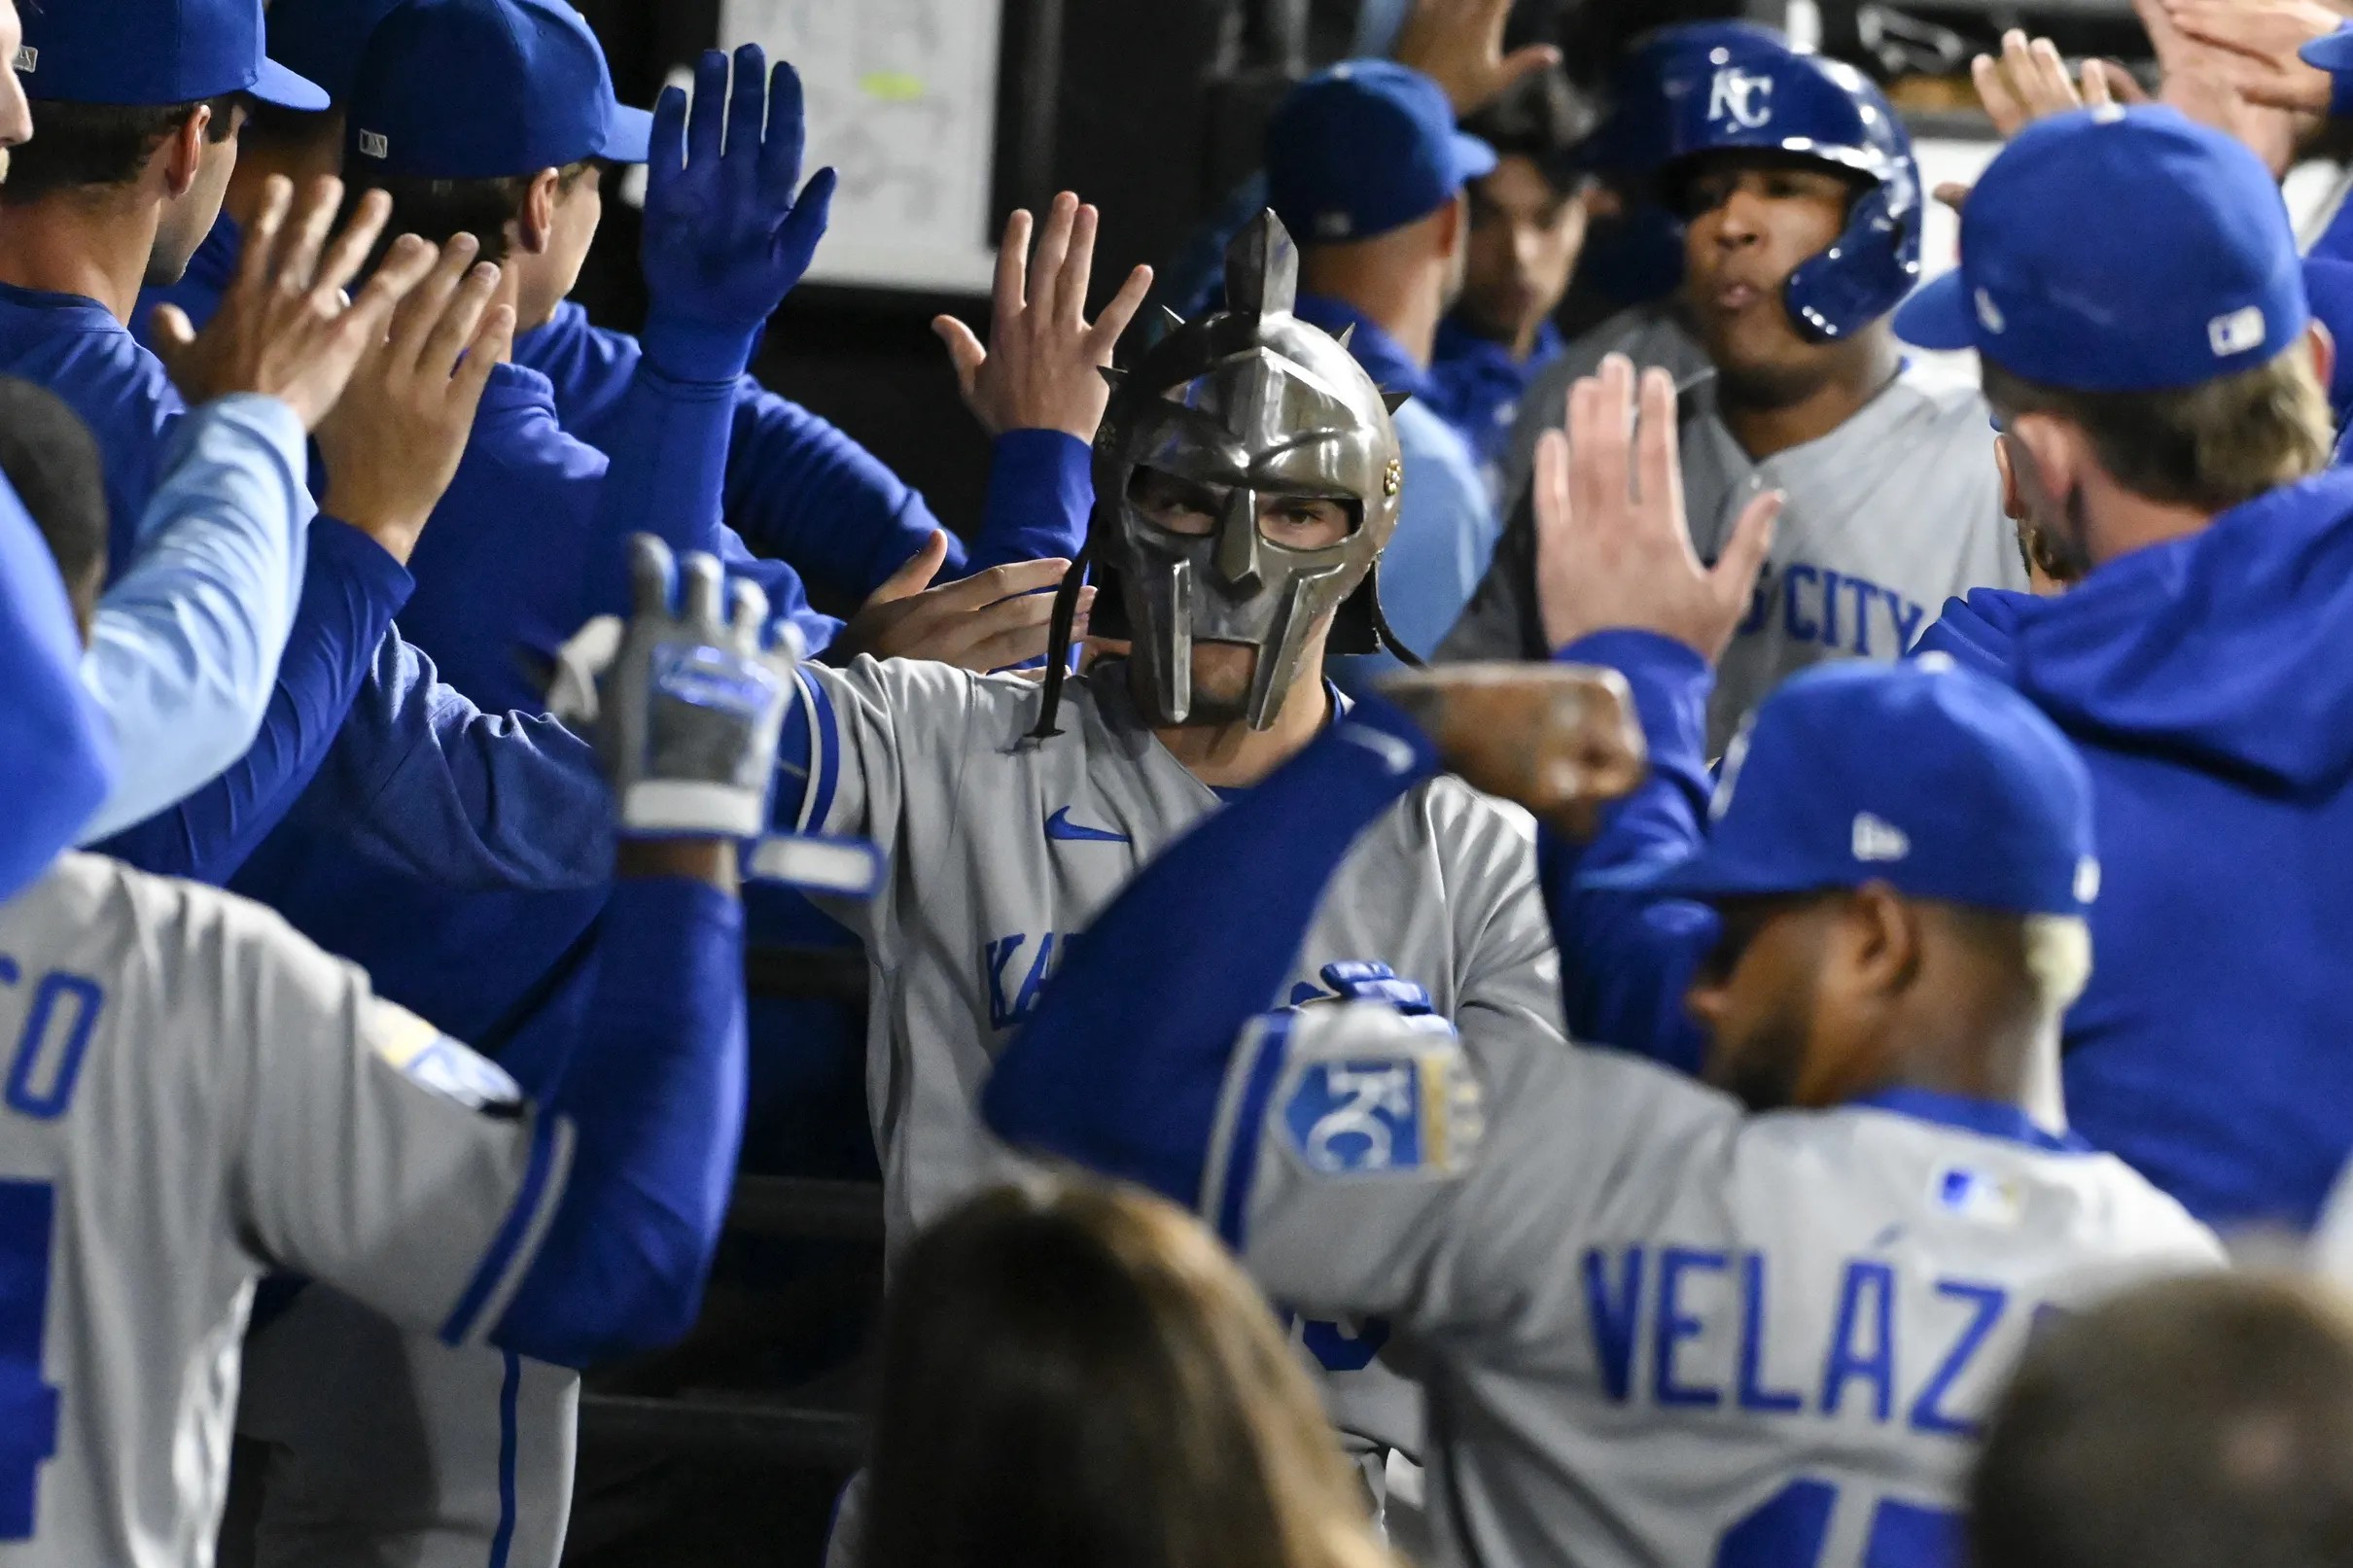 Royals split doubleheader with Sox...barely